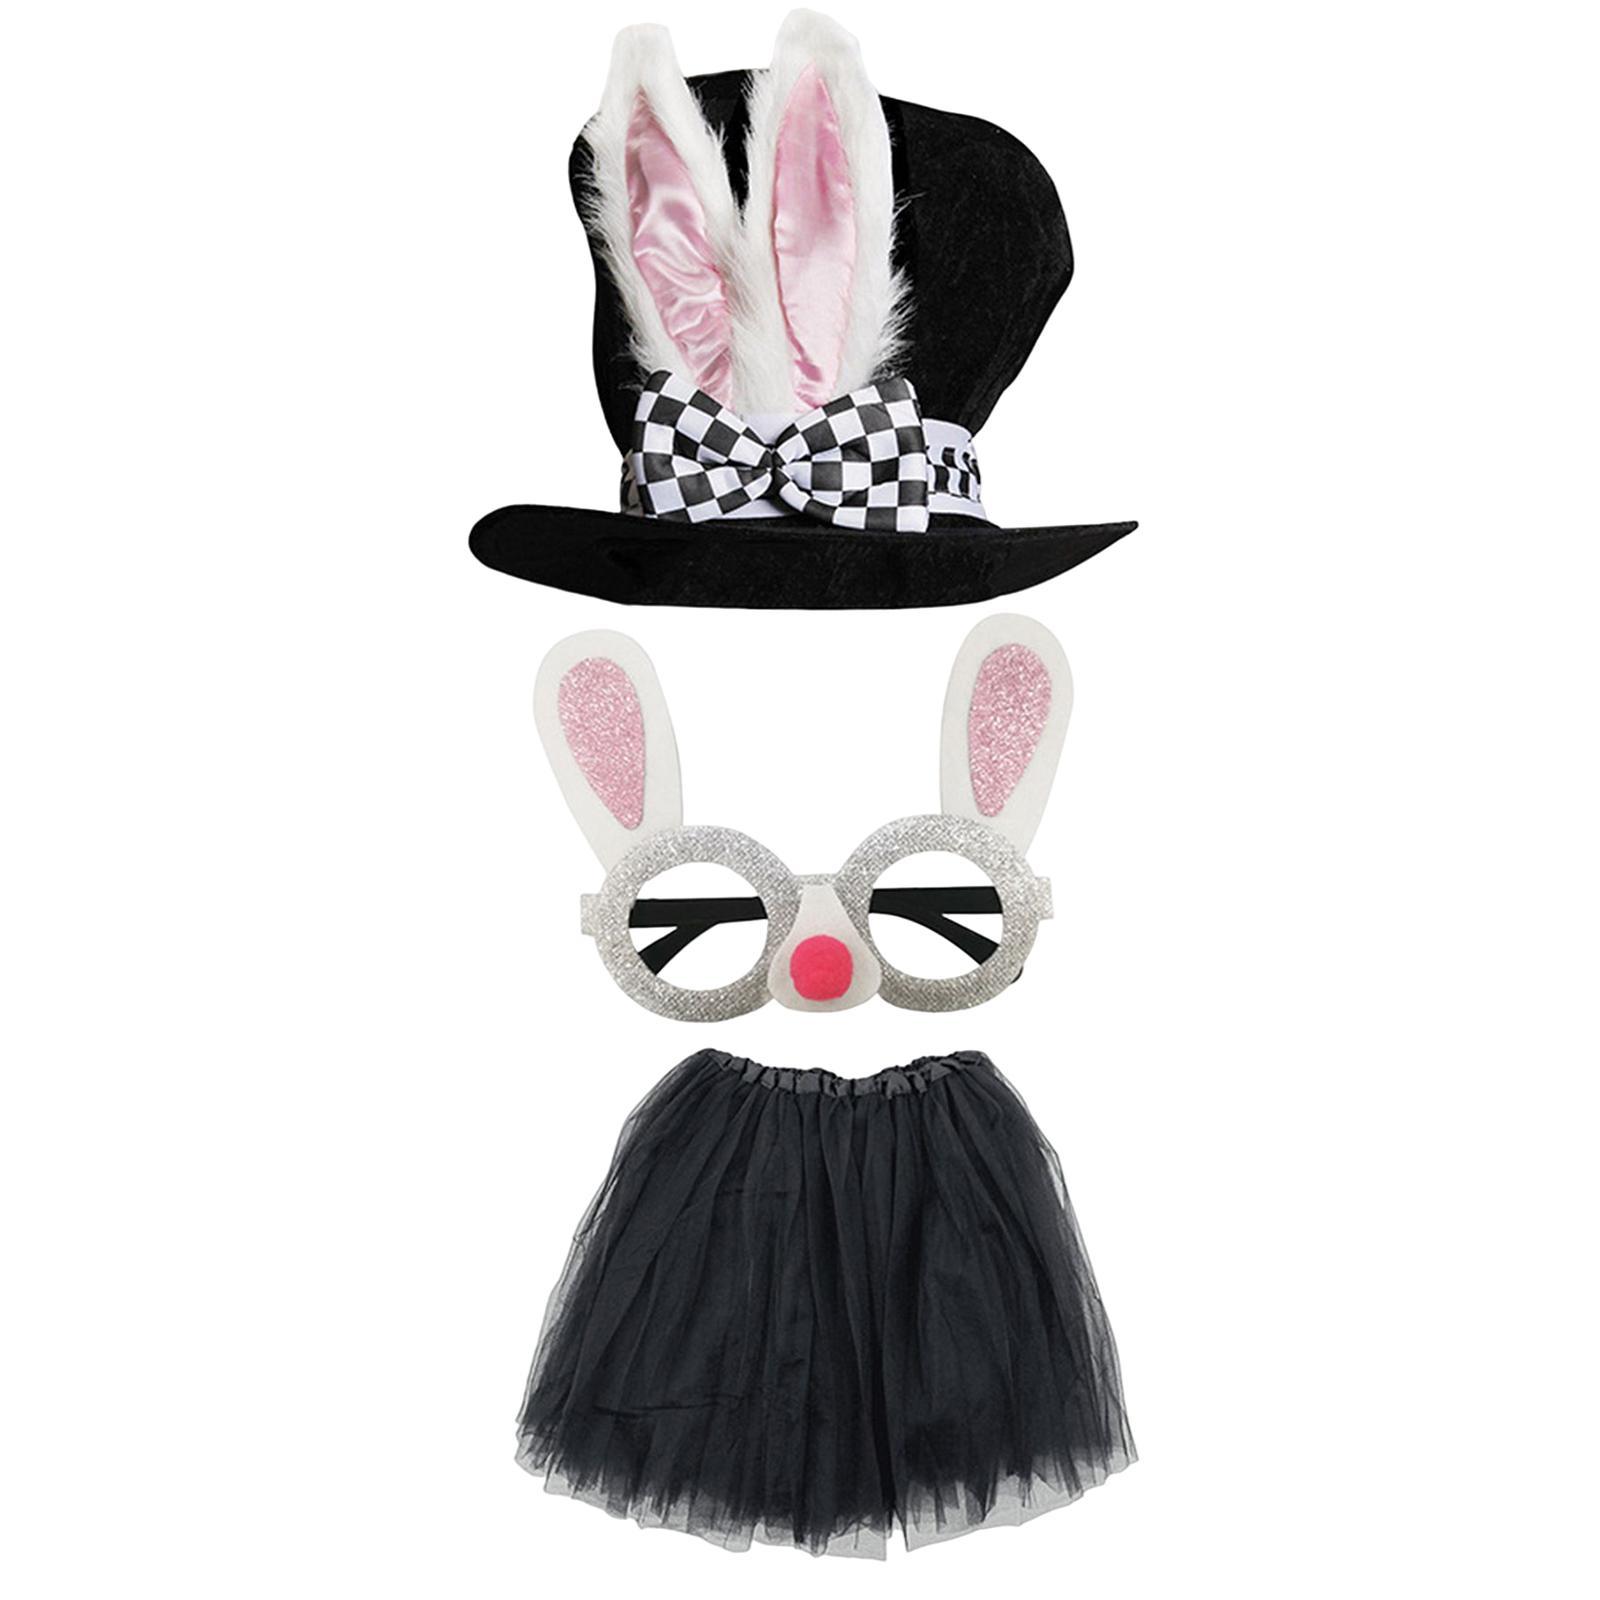 Bunny Costume Rabbit Topper Hat Skirt Glasses Animal Themed Parties for Kids Party Favors Carnival